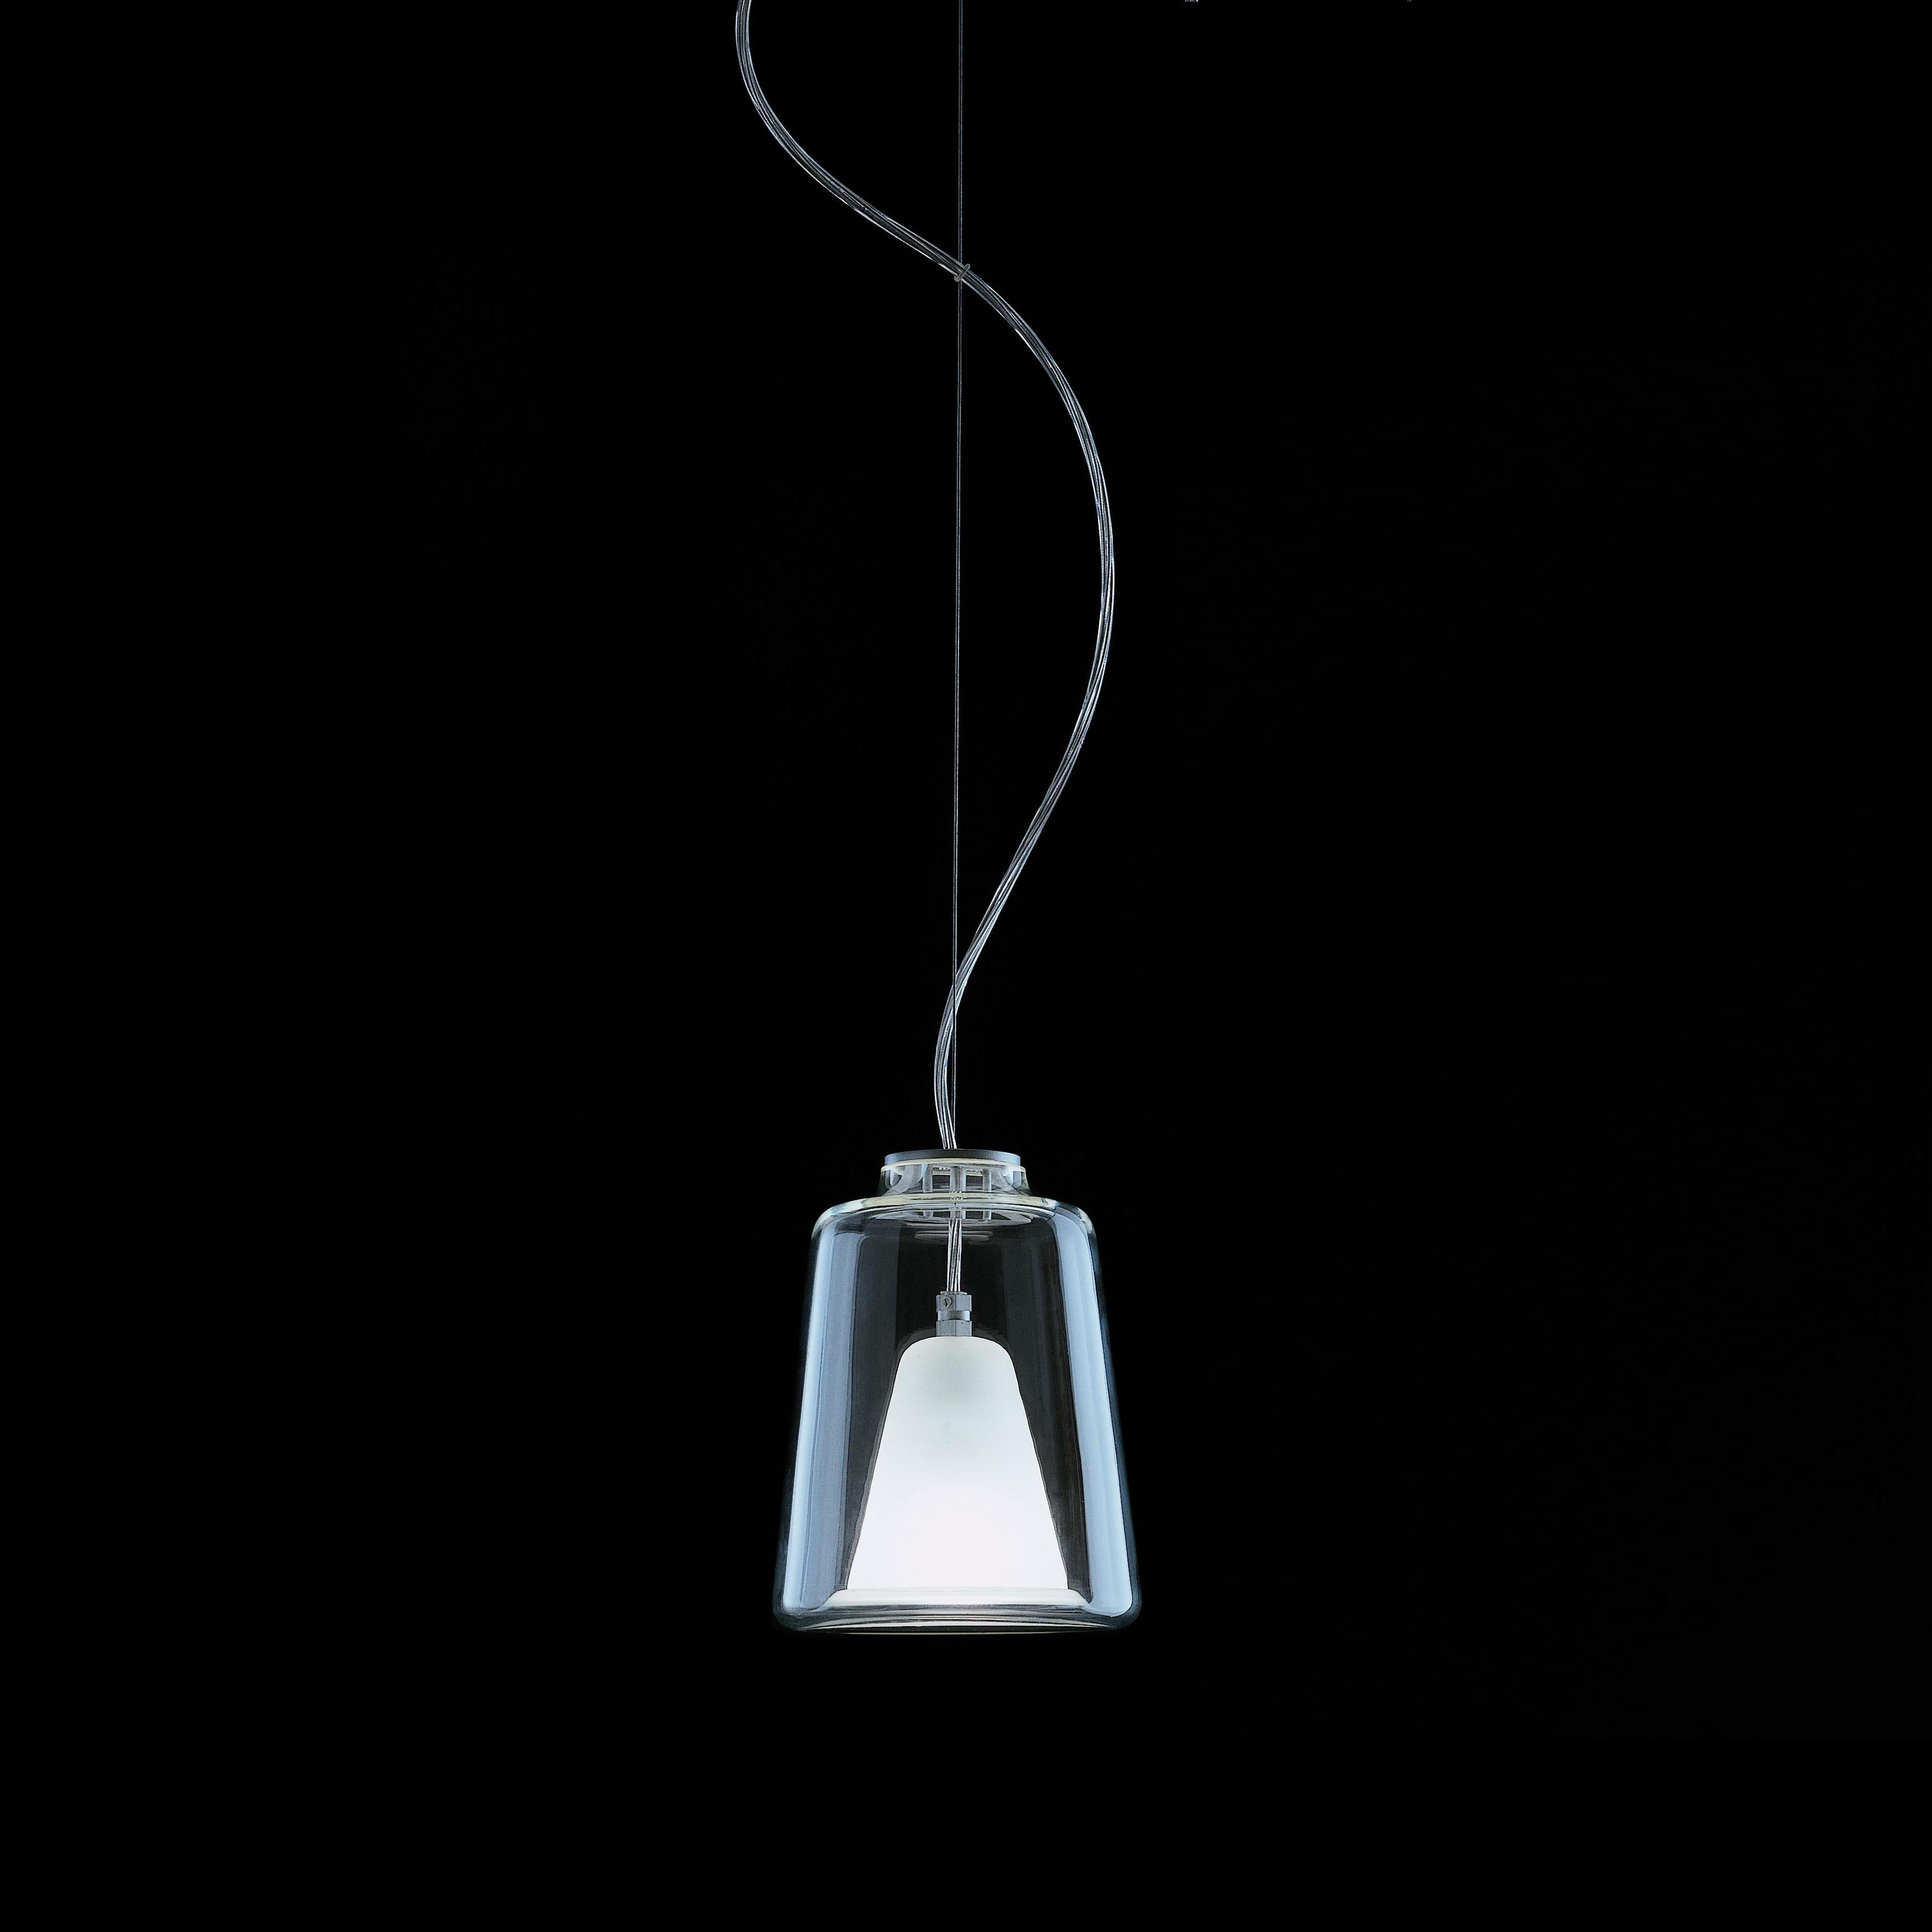 Suspension lamp 'Lanterna' designed by Marta Laudani & Marco Romanelli in 1998-2001. Suspension lamp giving diffused light. Transparent and sand-blasted Murano glass diffusers. Glazed anodized metal structure. Manufactured by Oluce, Italy.

With